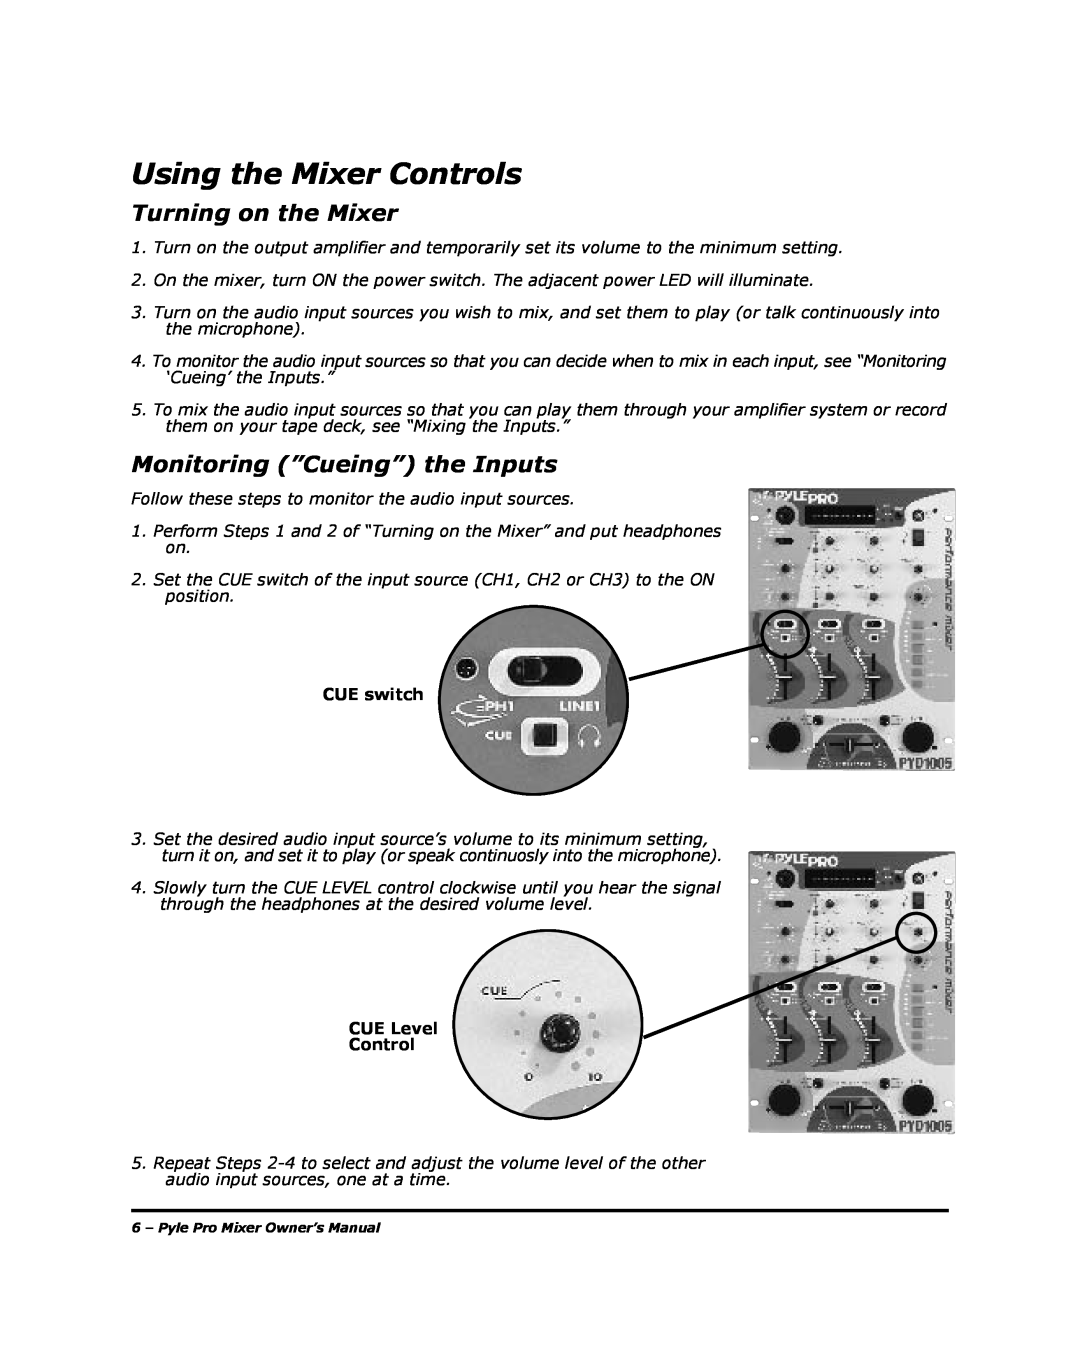 PYLE Audio PYD-1002, PYD-1005 manual Using the Mixer Controls, Turning on the Mixer, Monitoring ”Cueing” the Inputs 